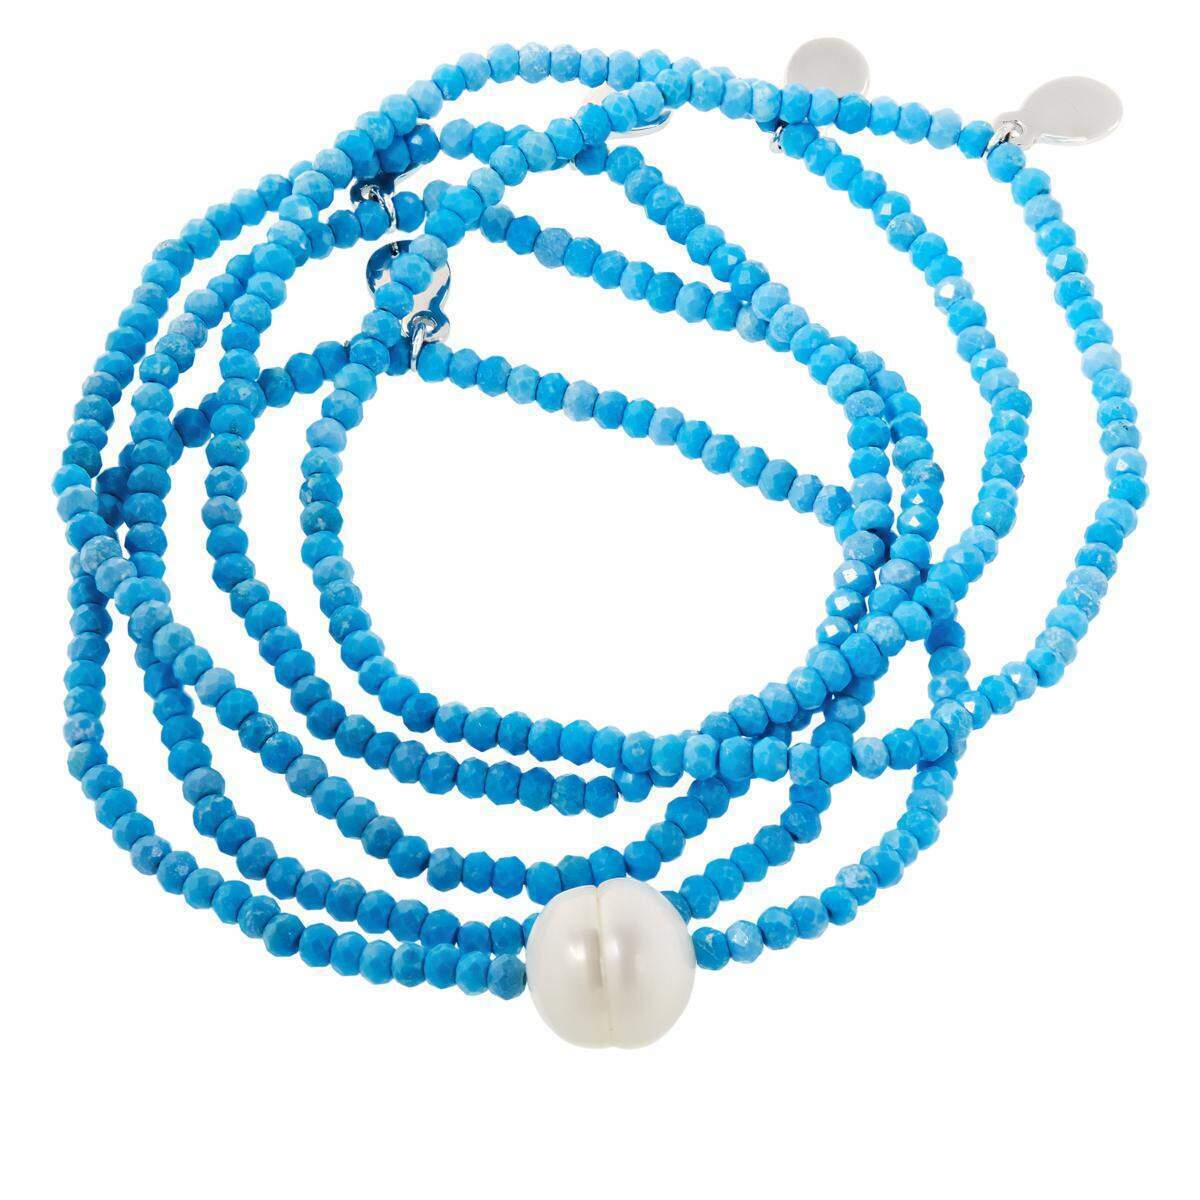 Colleen Lopez Cultured Freshwater Pearl & Turquoise Beaded Stretch Bracelet